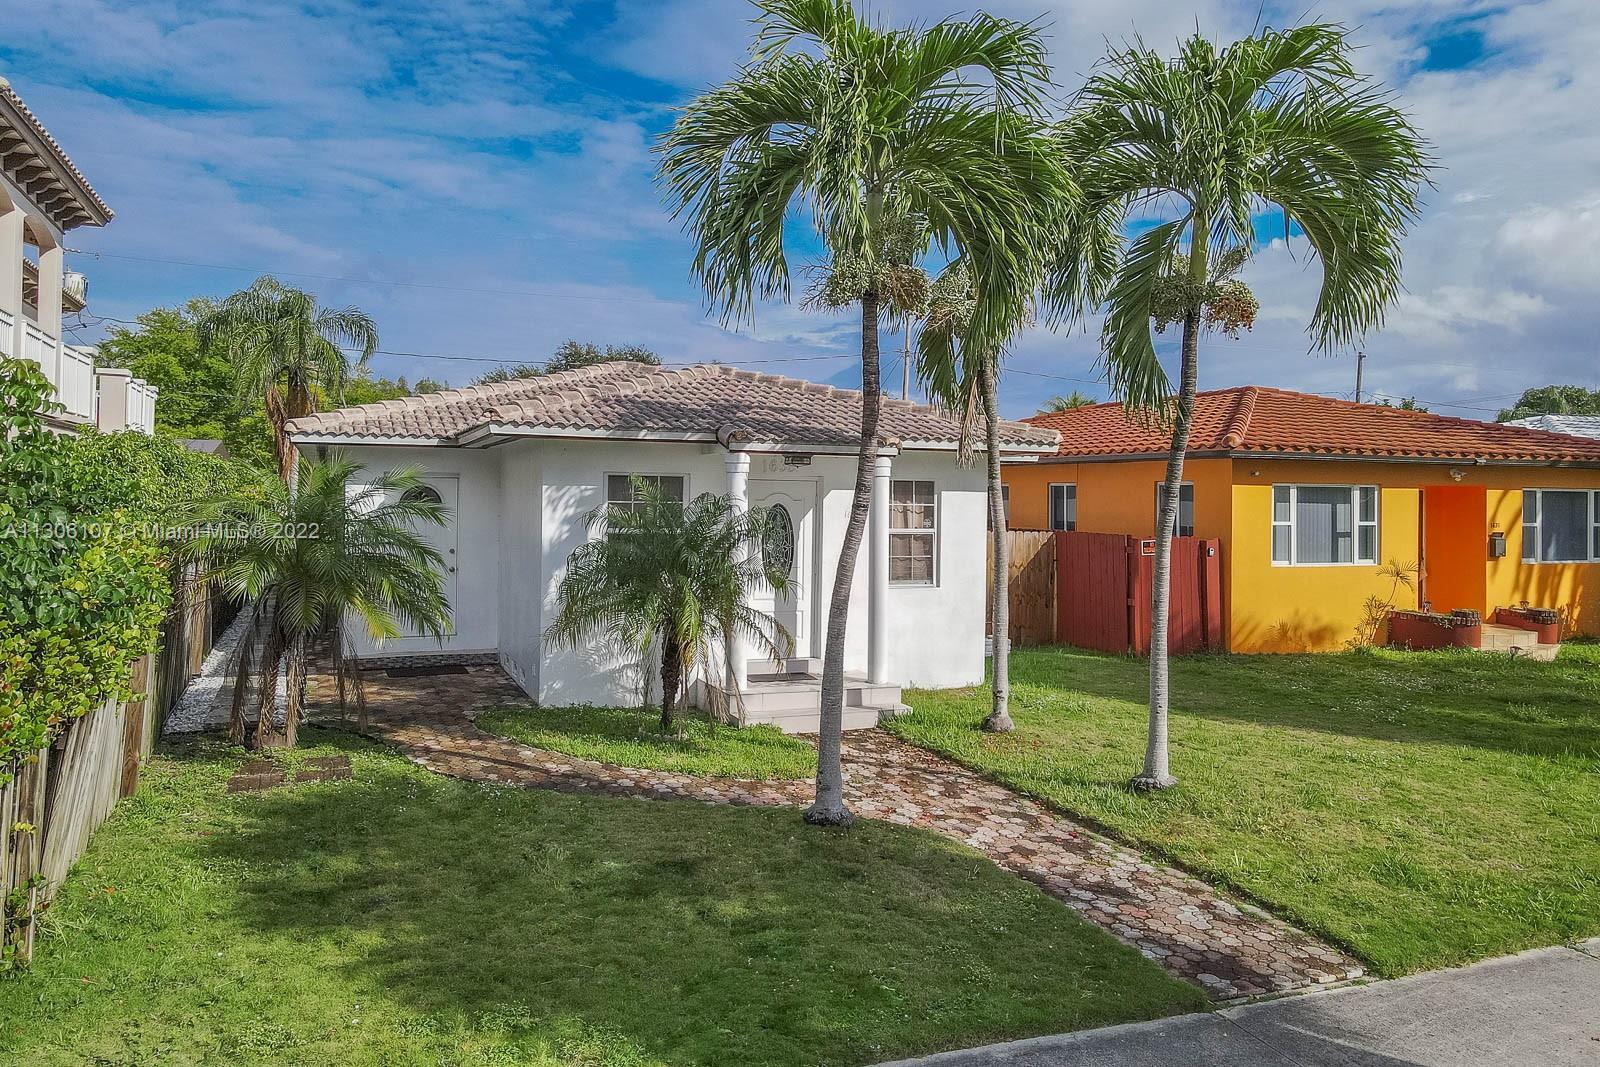 CHARM, LOCATION AND CONVENIENCE! This home is a short walk or bike ride to beautiful Hollywood Beach